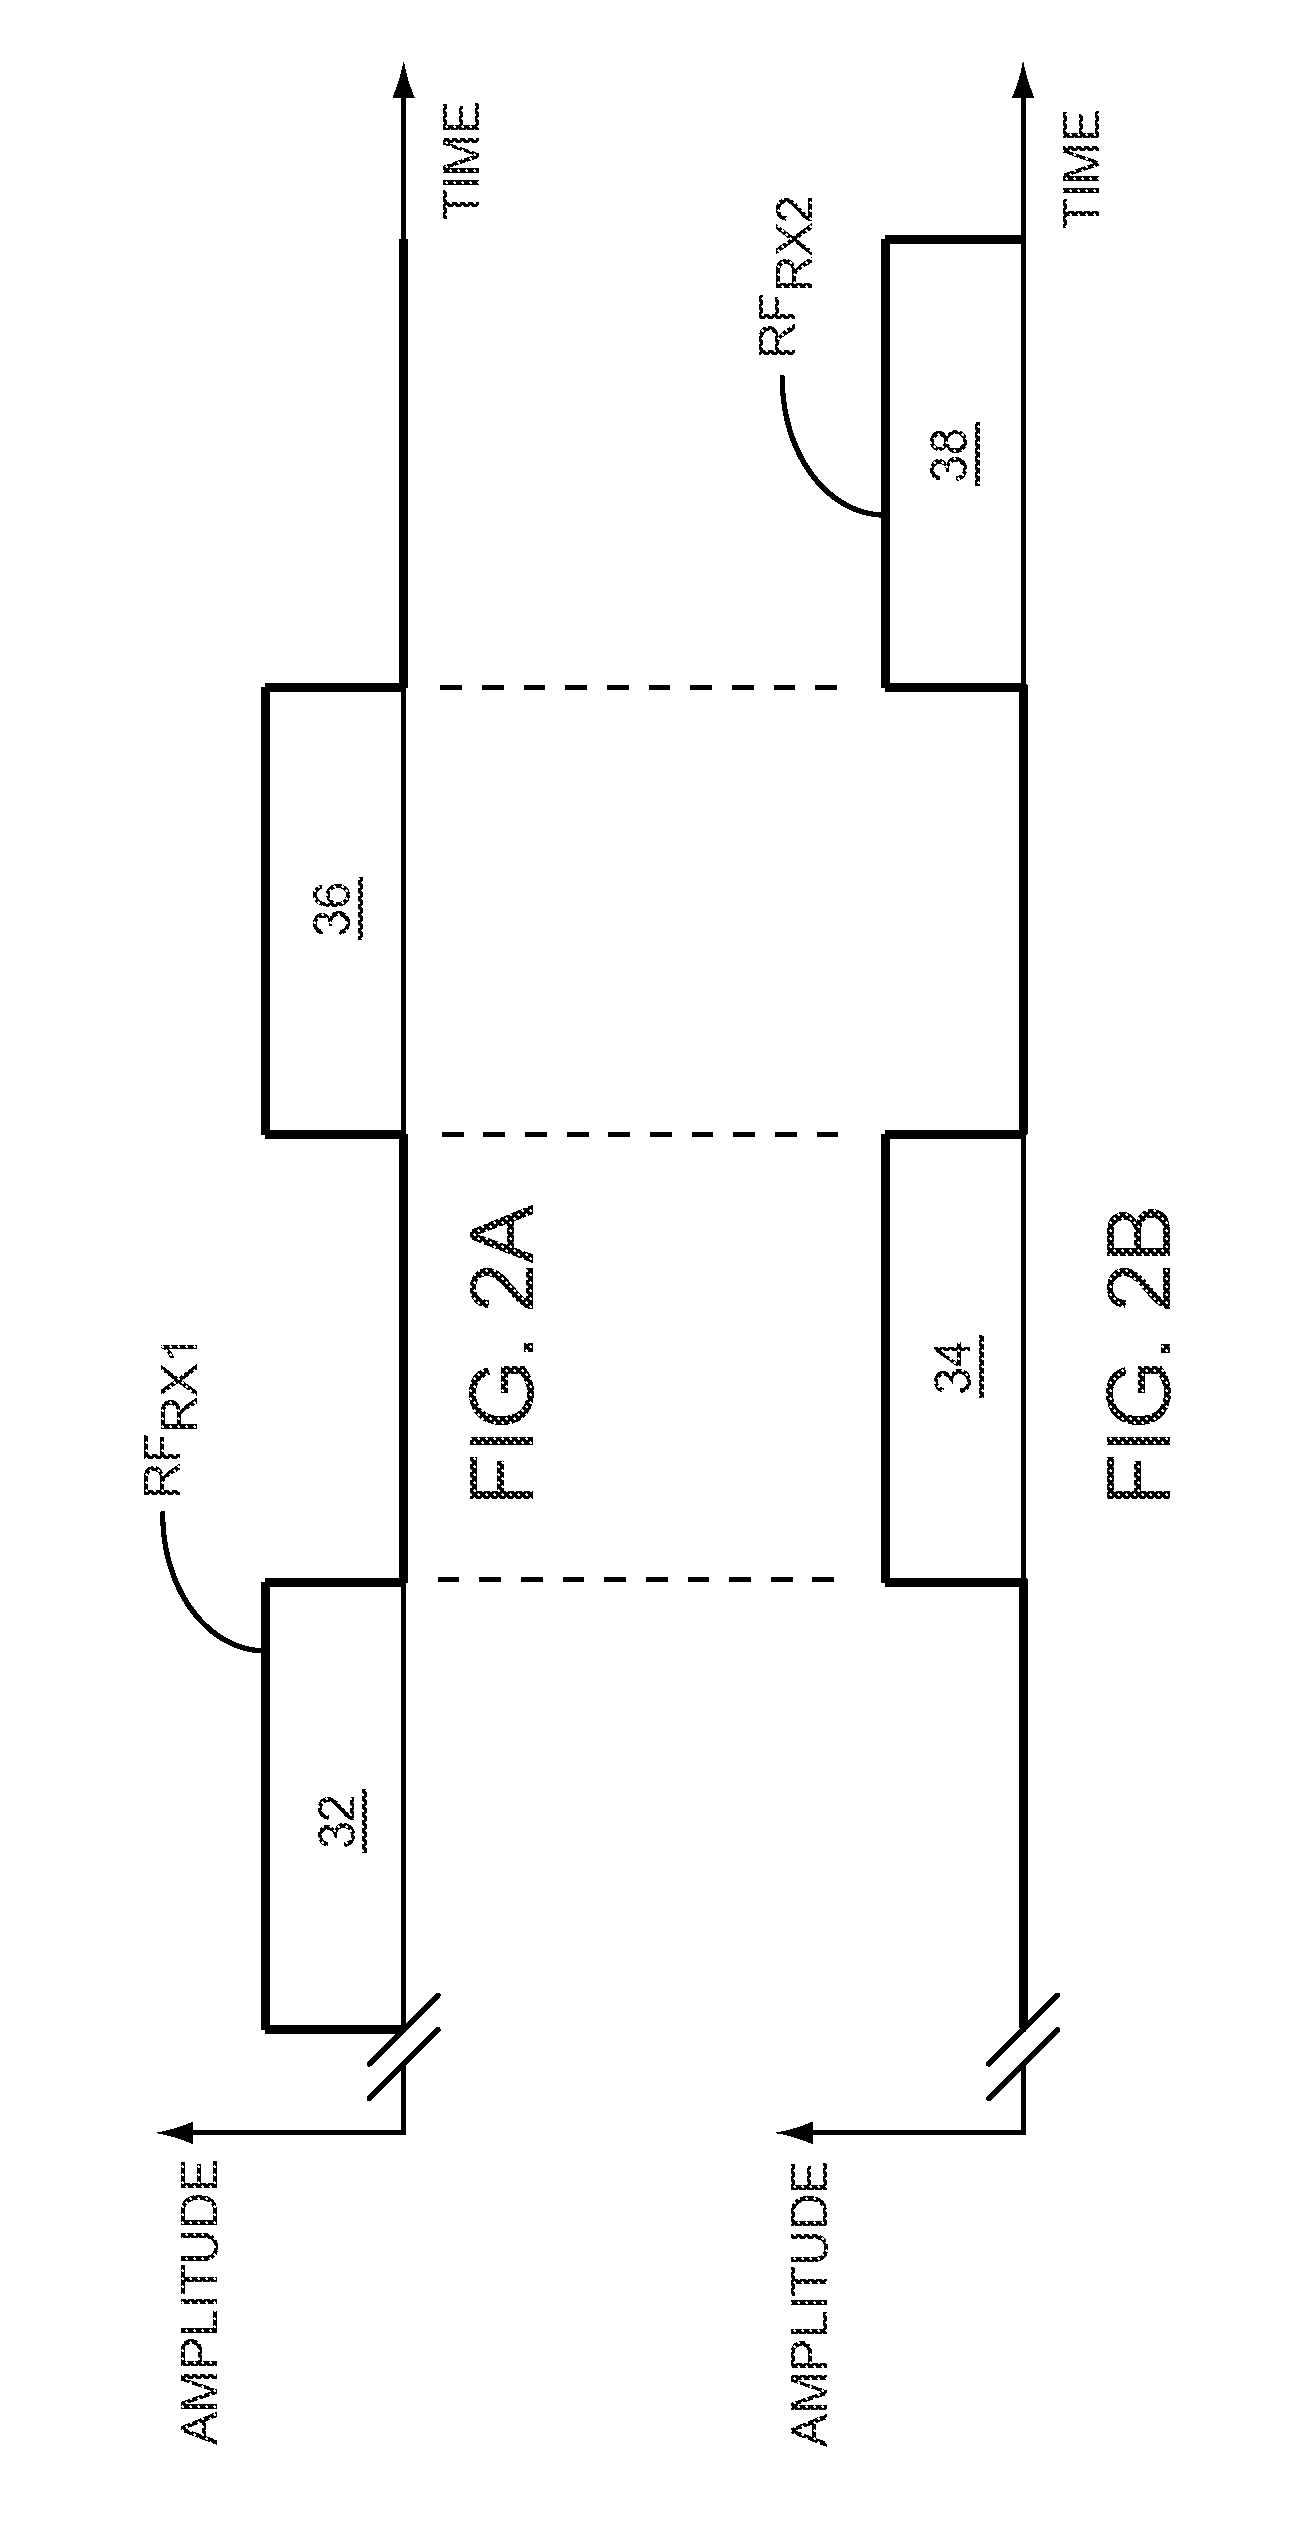 Noise reduction in a dual radio frequency receiver